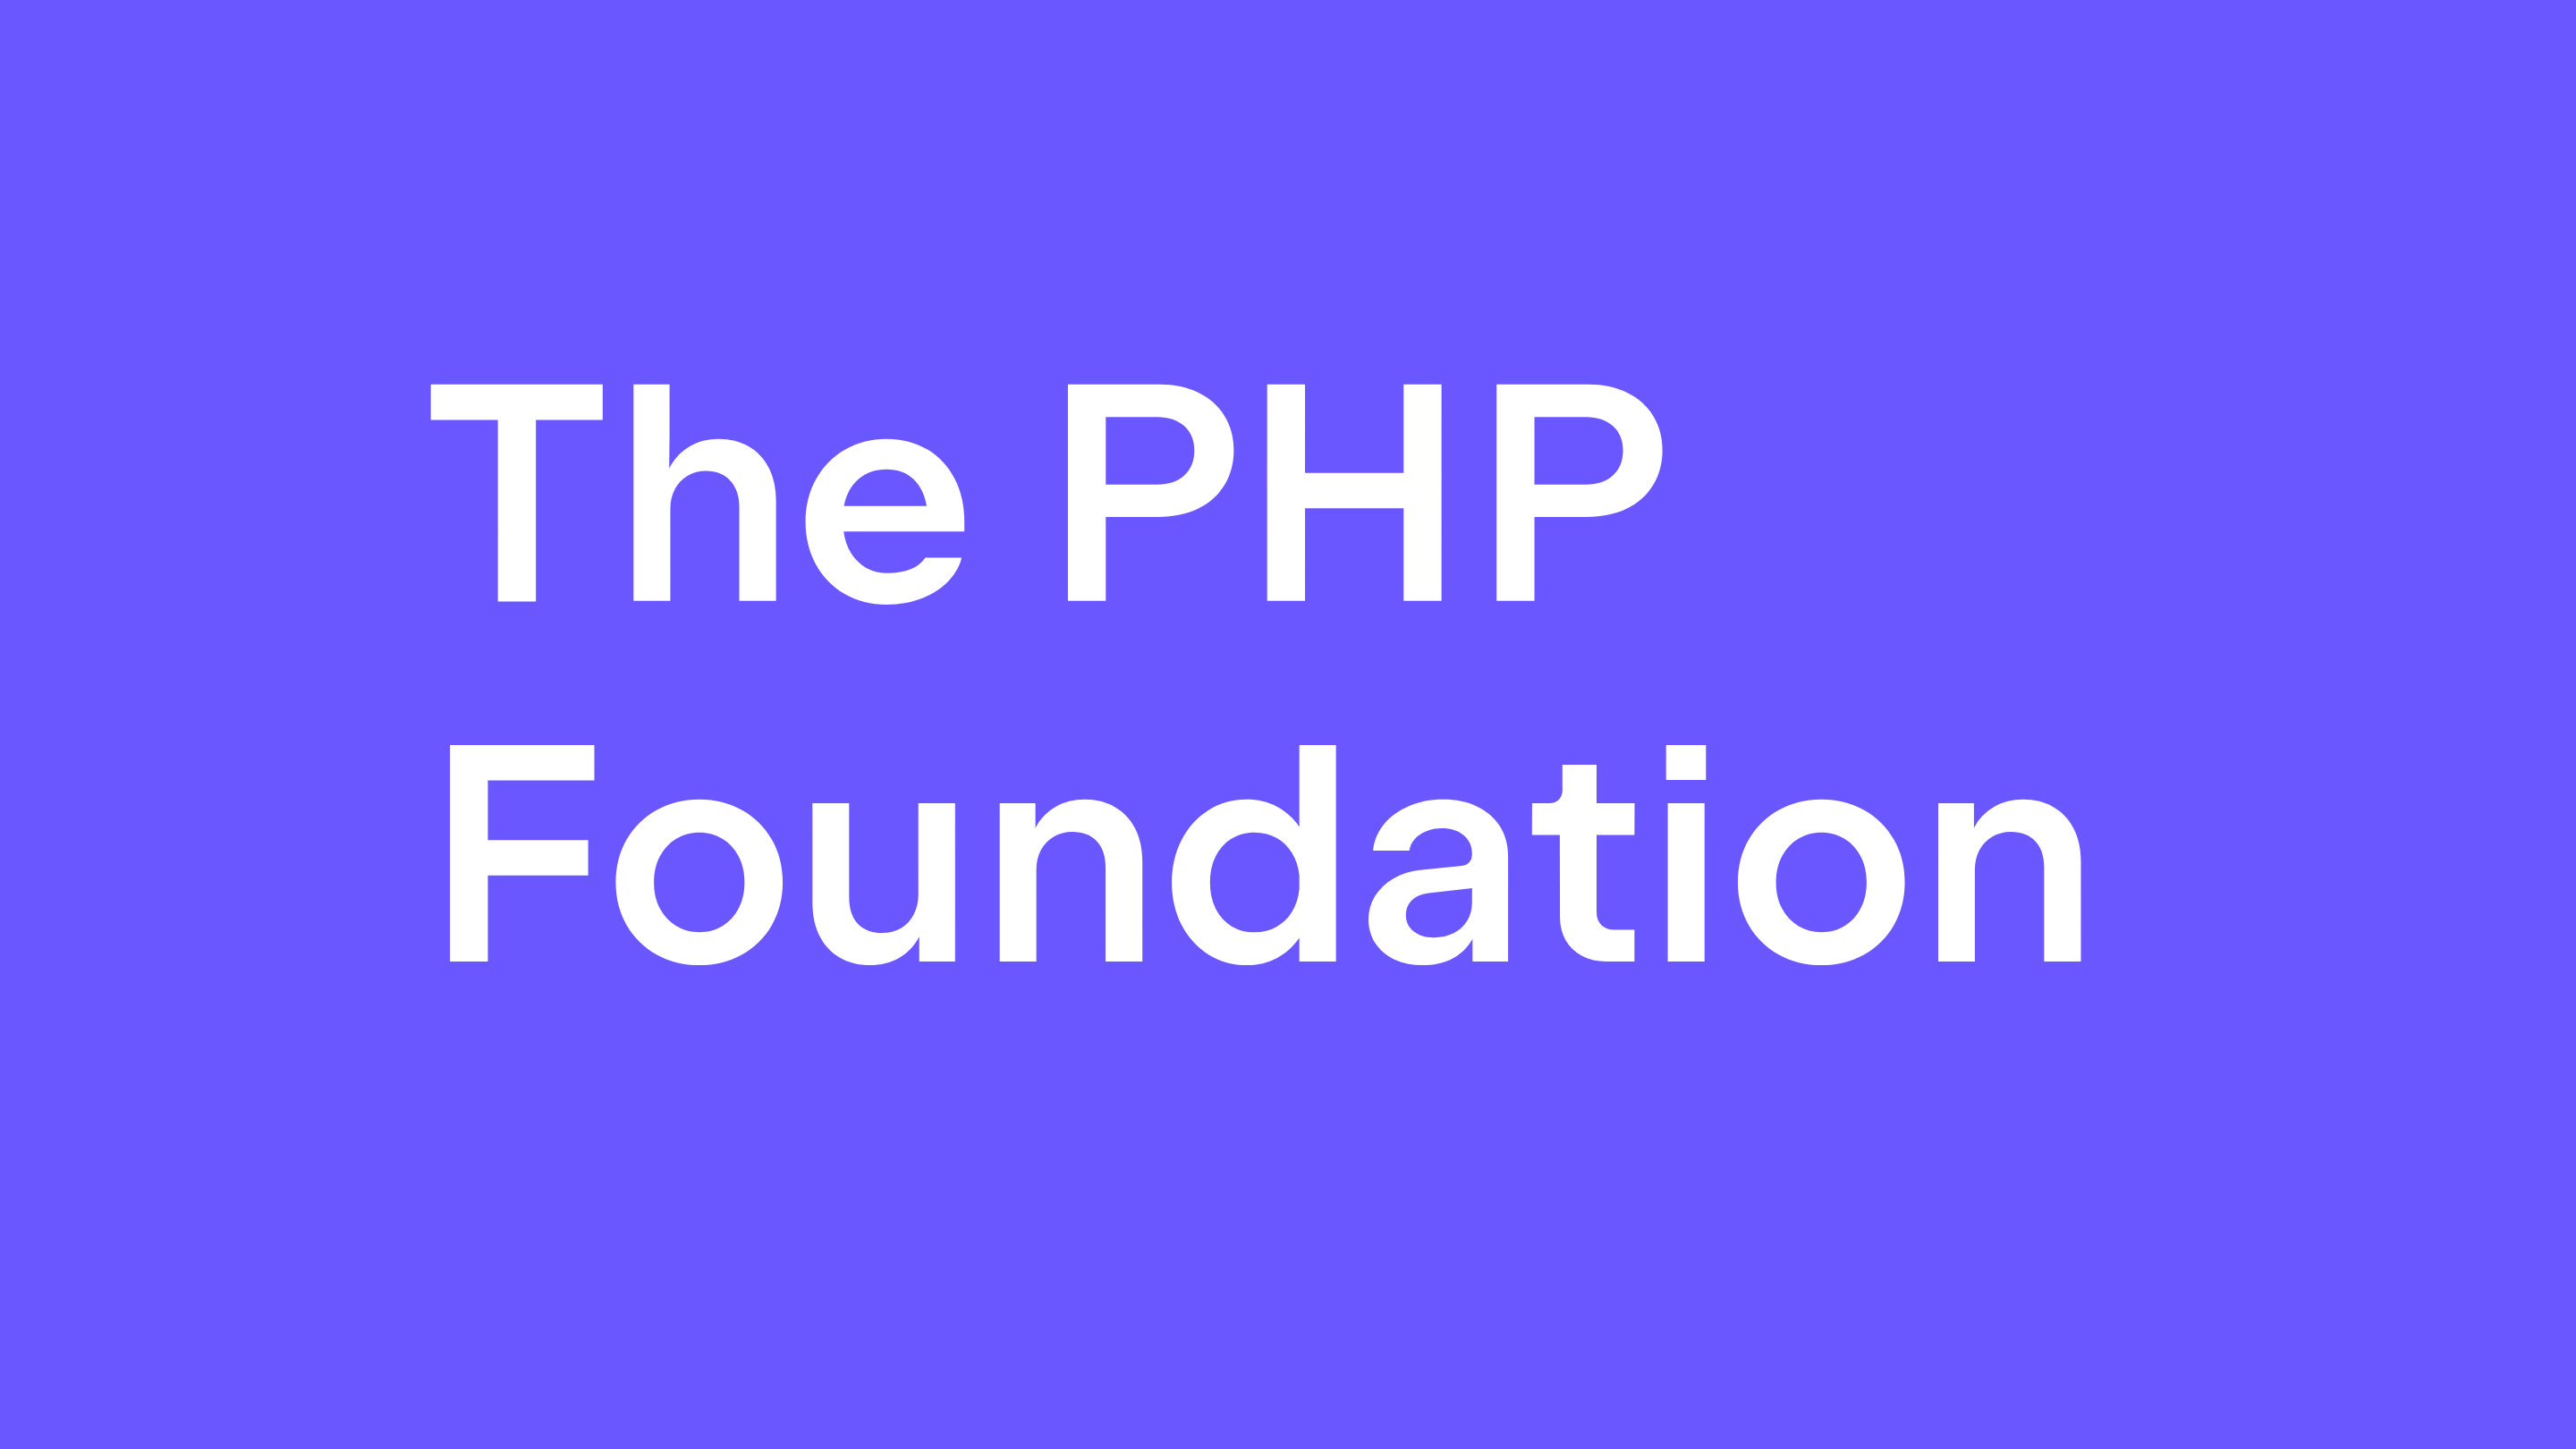 The PHP Foundation